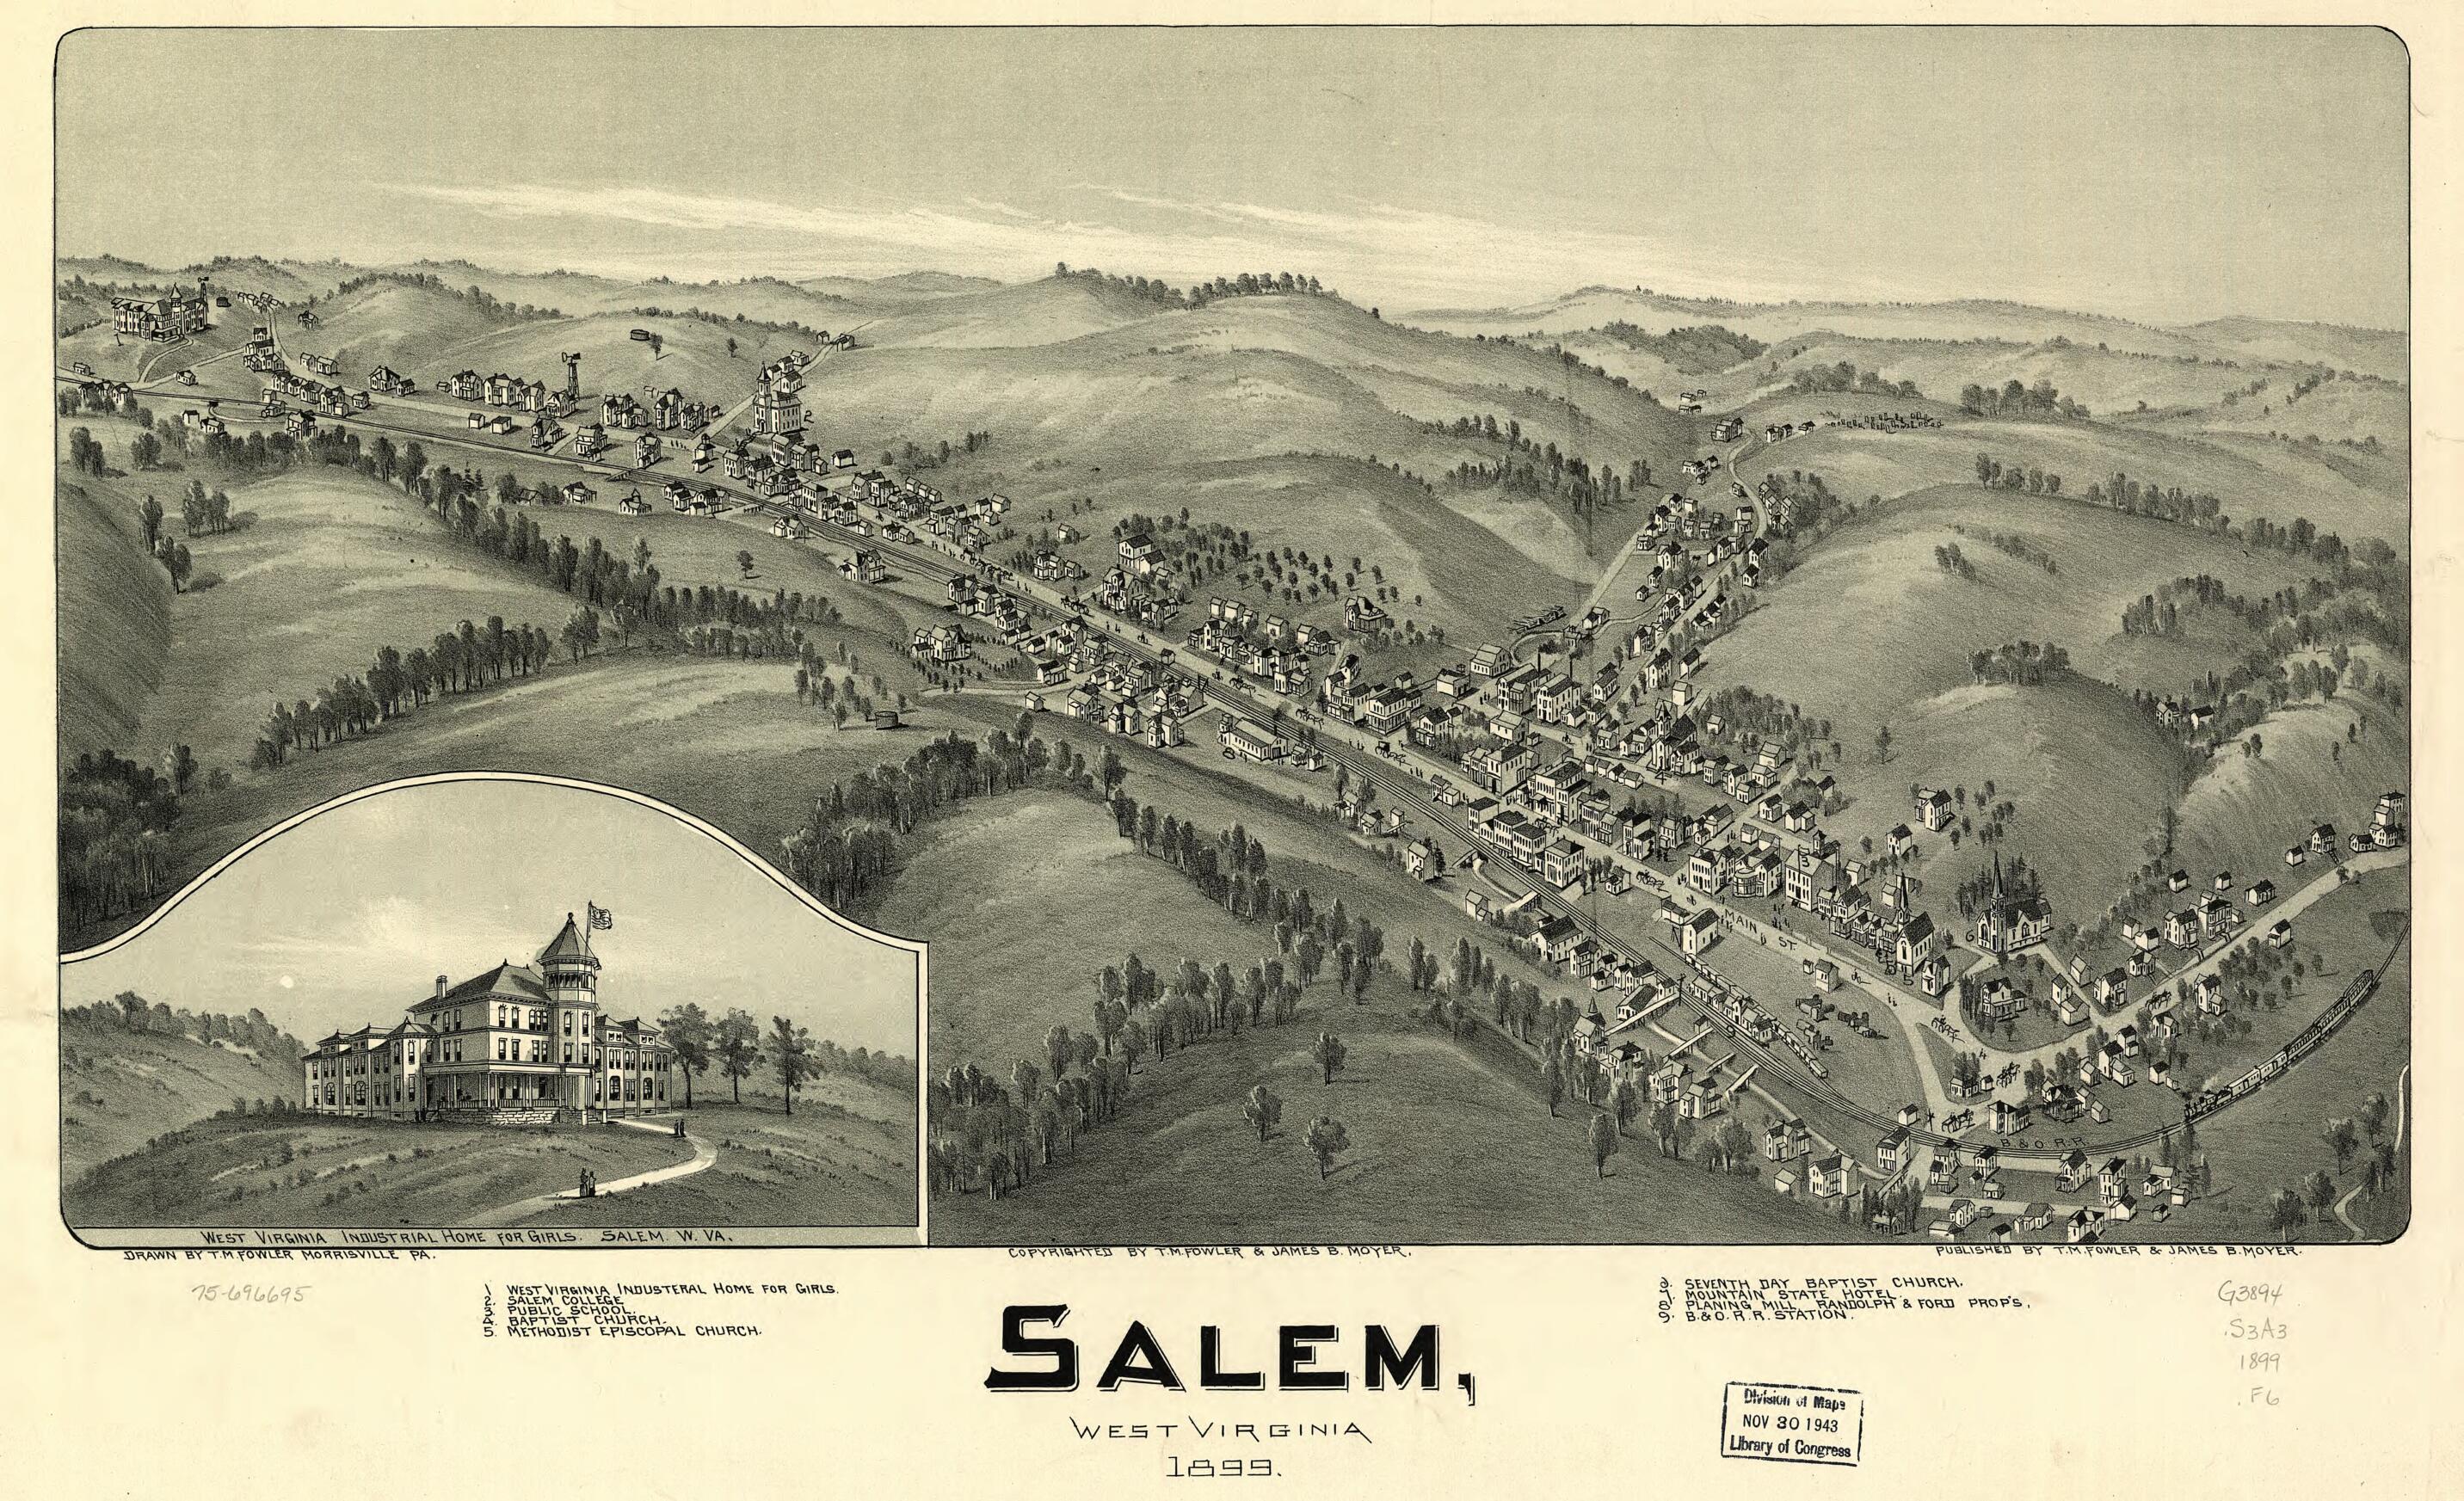 This old map of Salem, West Virginia from 1899 was created by T. M. (Thaddeus Mortimer) Fowler, James B. Moyer in 1899